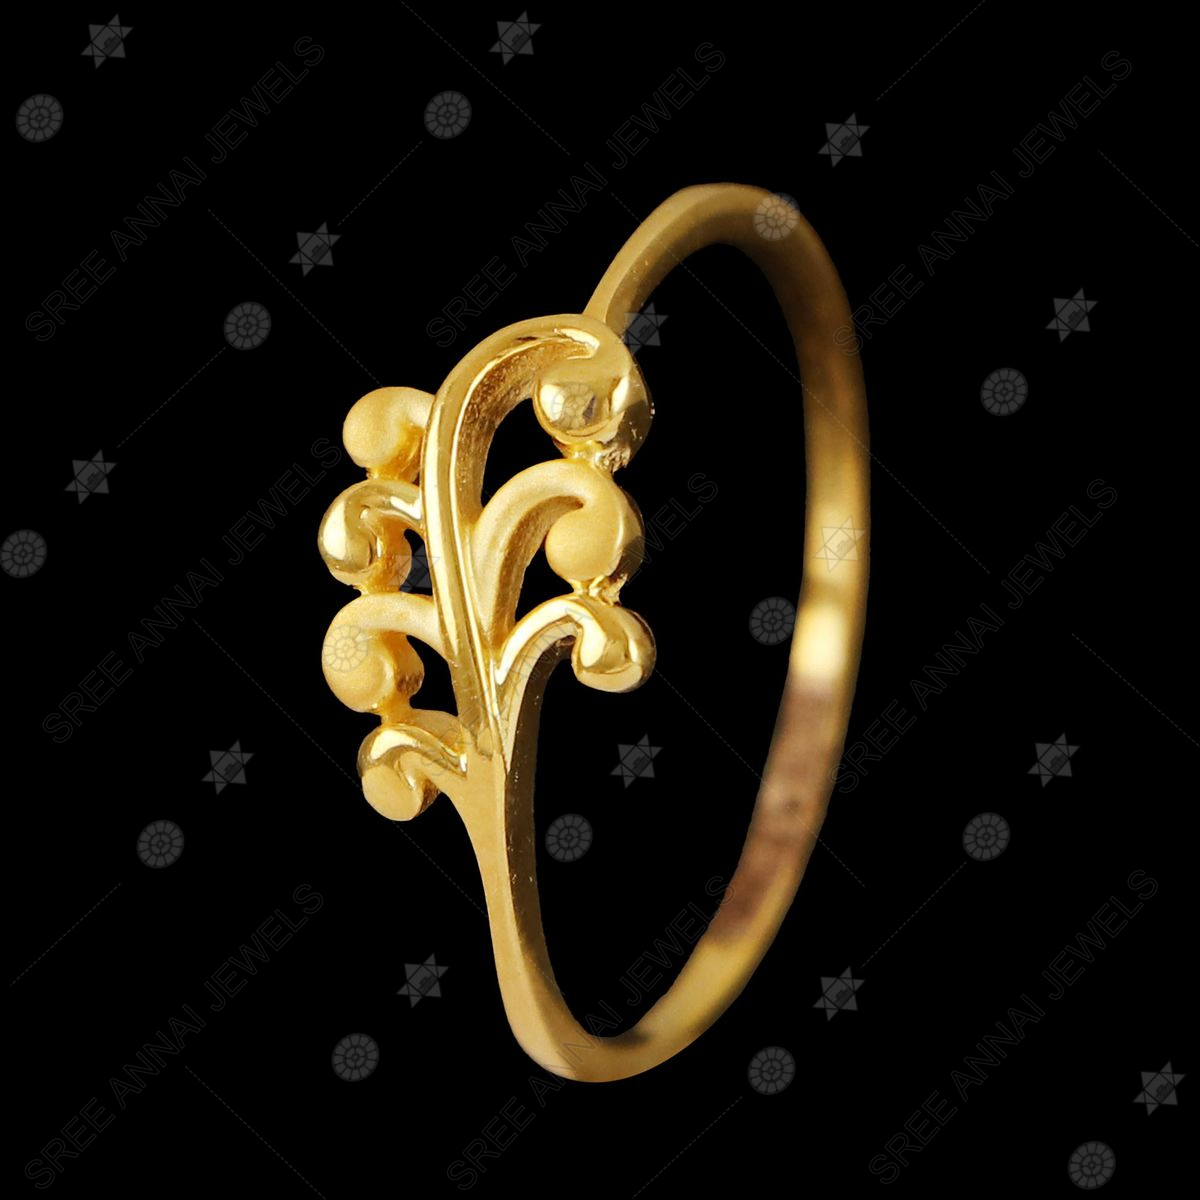 3YLR-010 Royal Gold Finger Ring Without| Alibaba.com